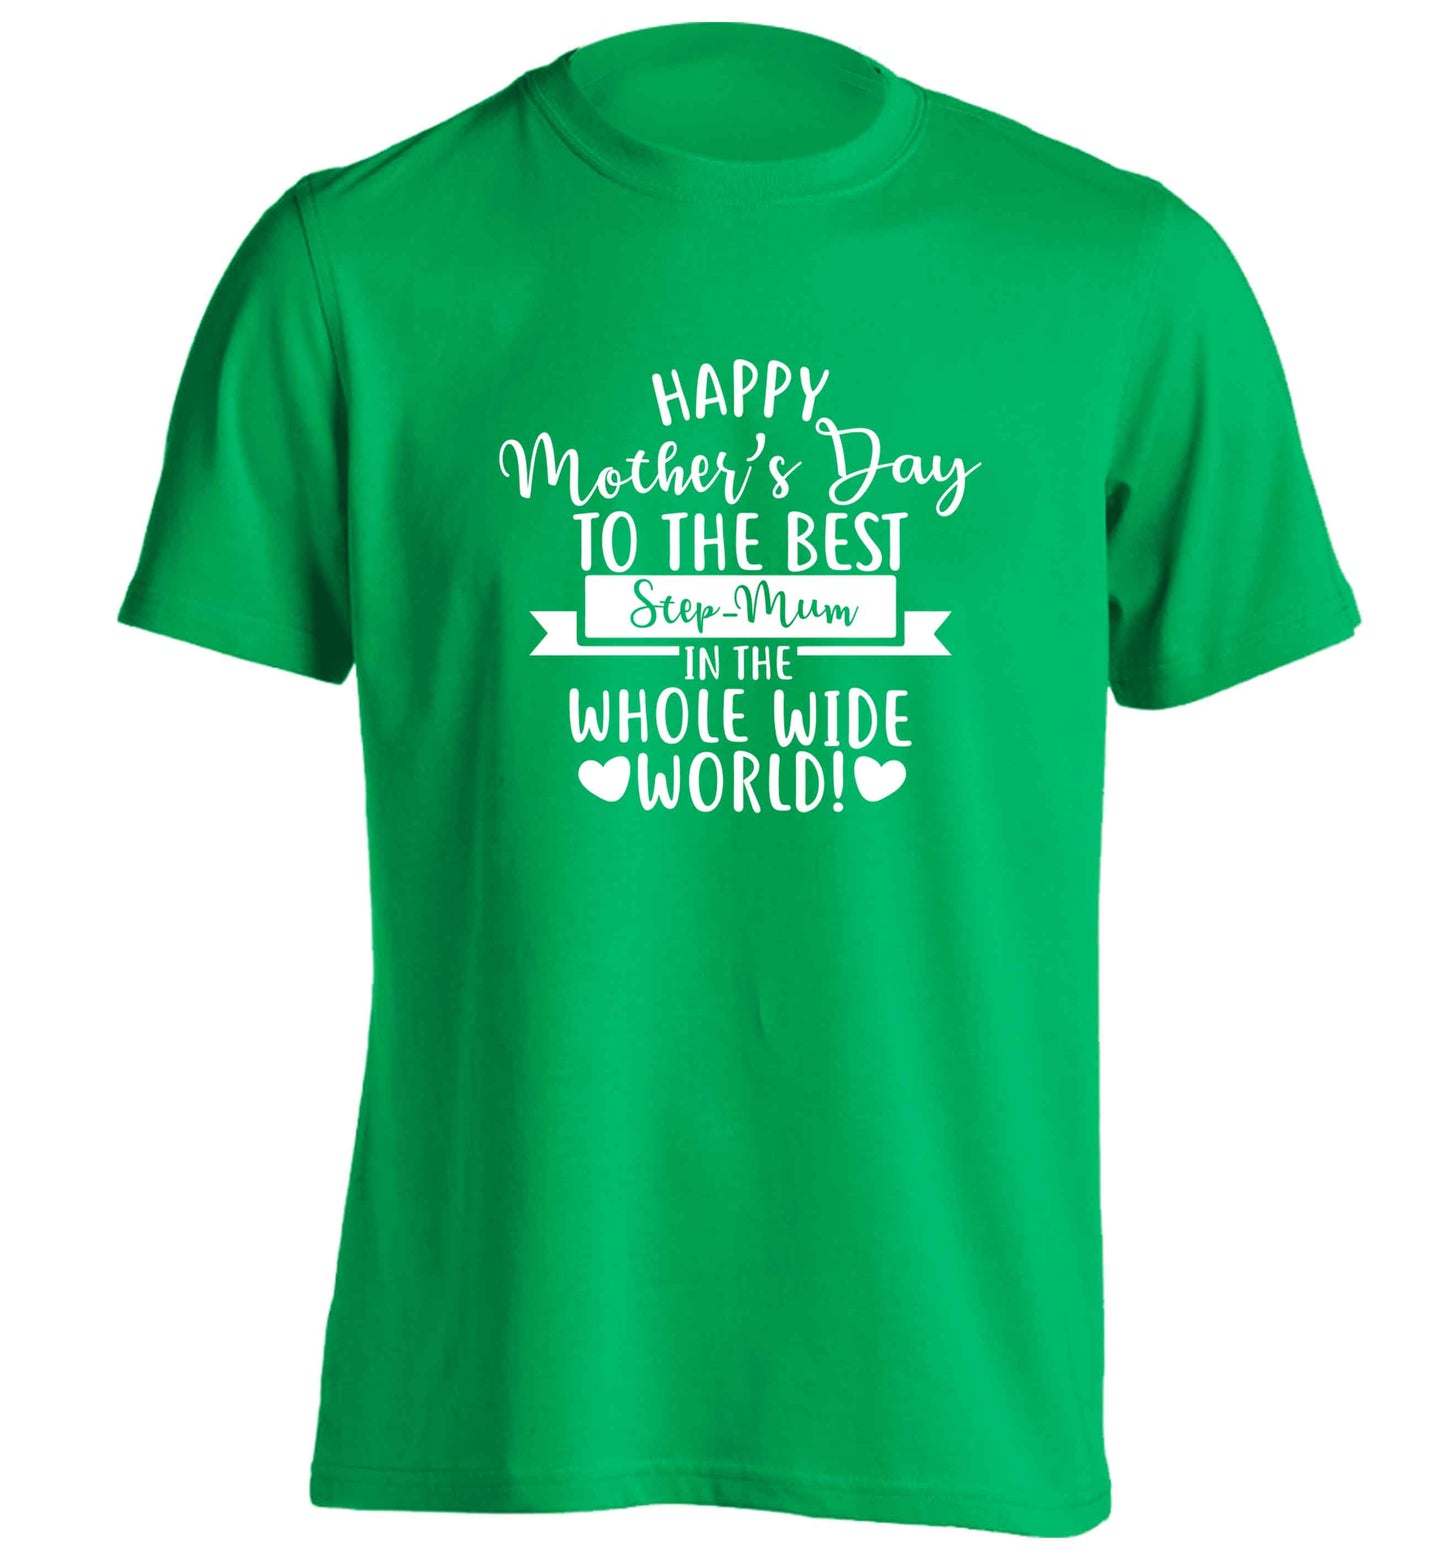 Happy mother's day to the best step-mum in the world adults unisex green Tshirt 2XL